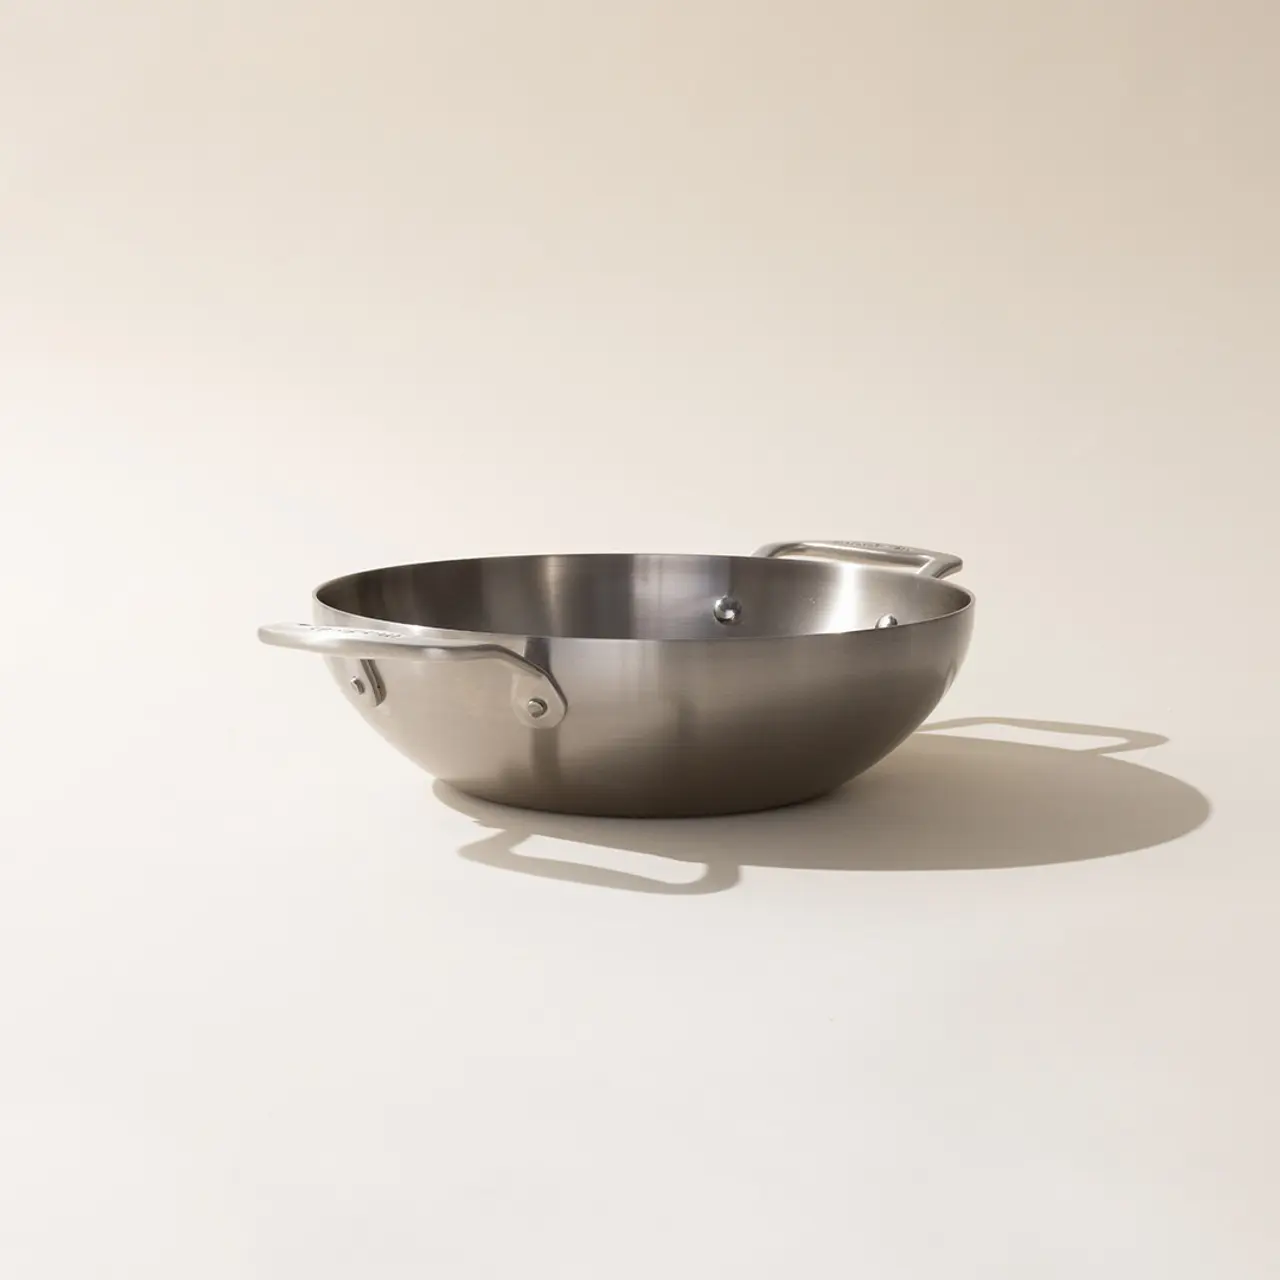 A stainless steel mixing bowl with handles on a neutral background casting a soft shadow.